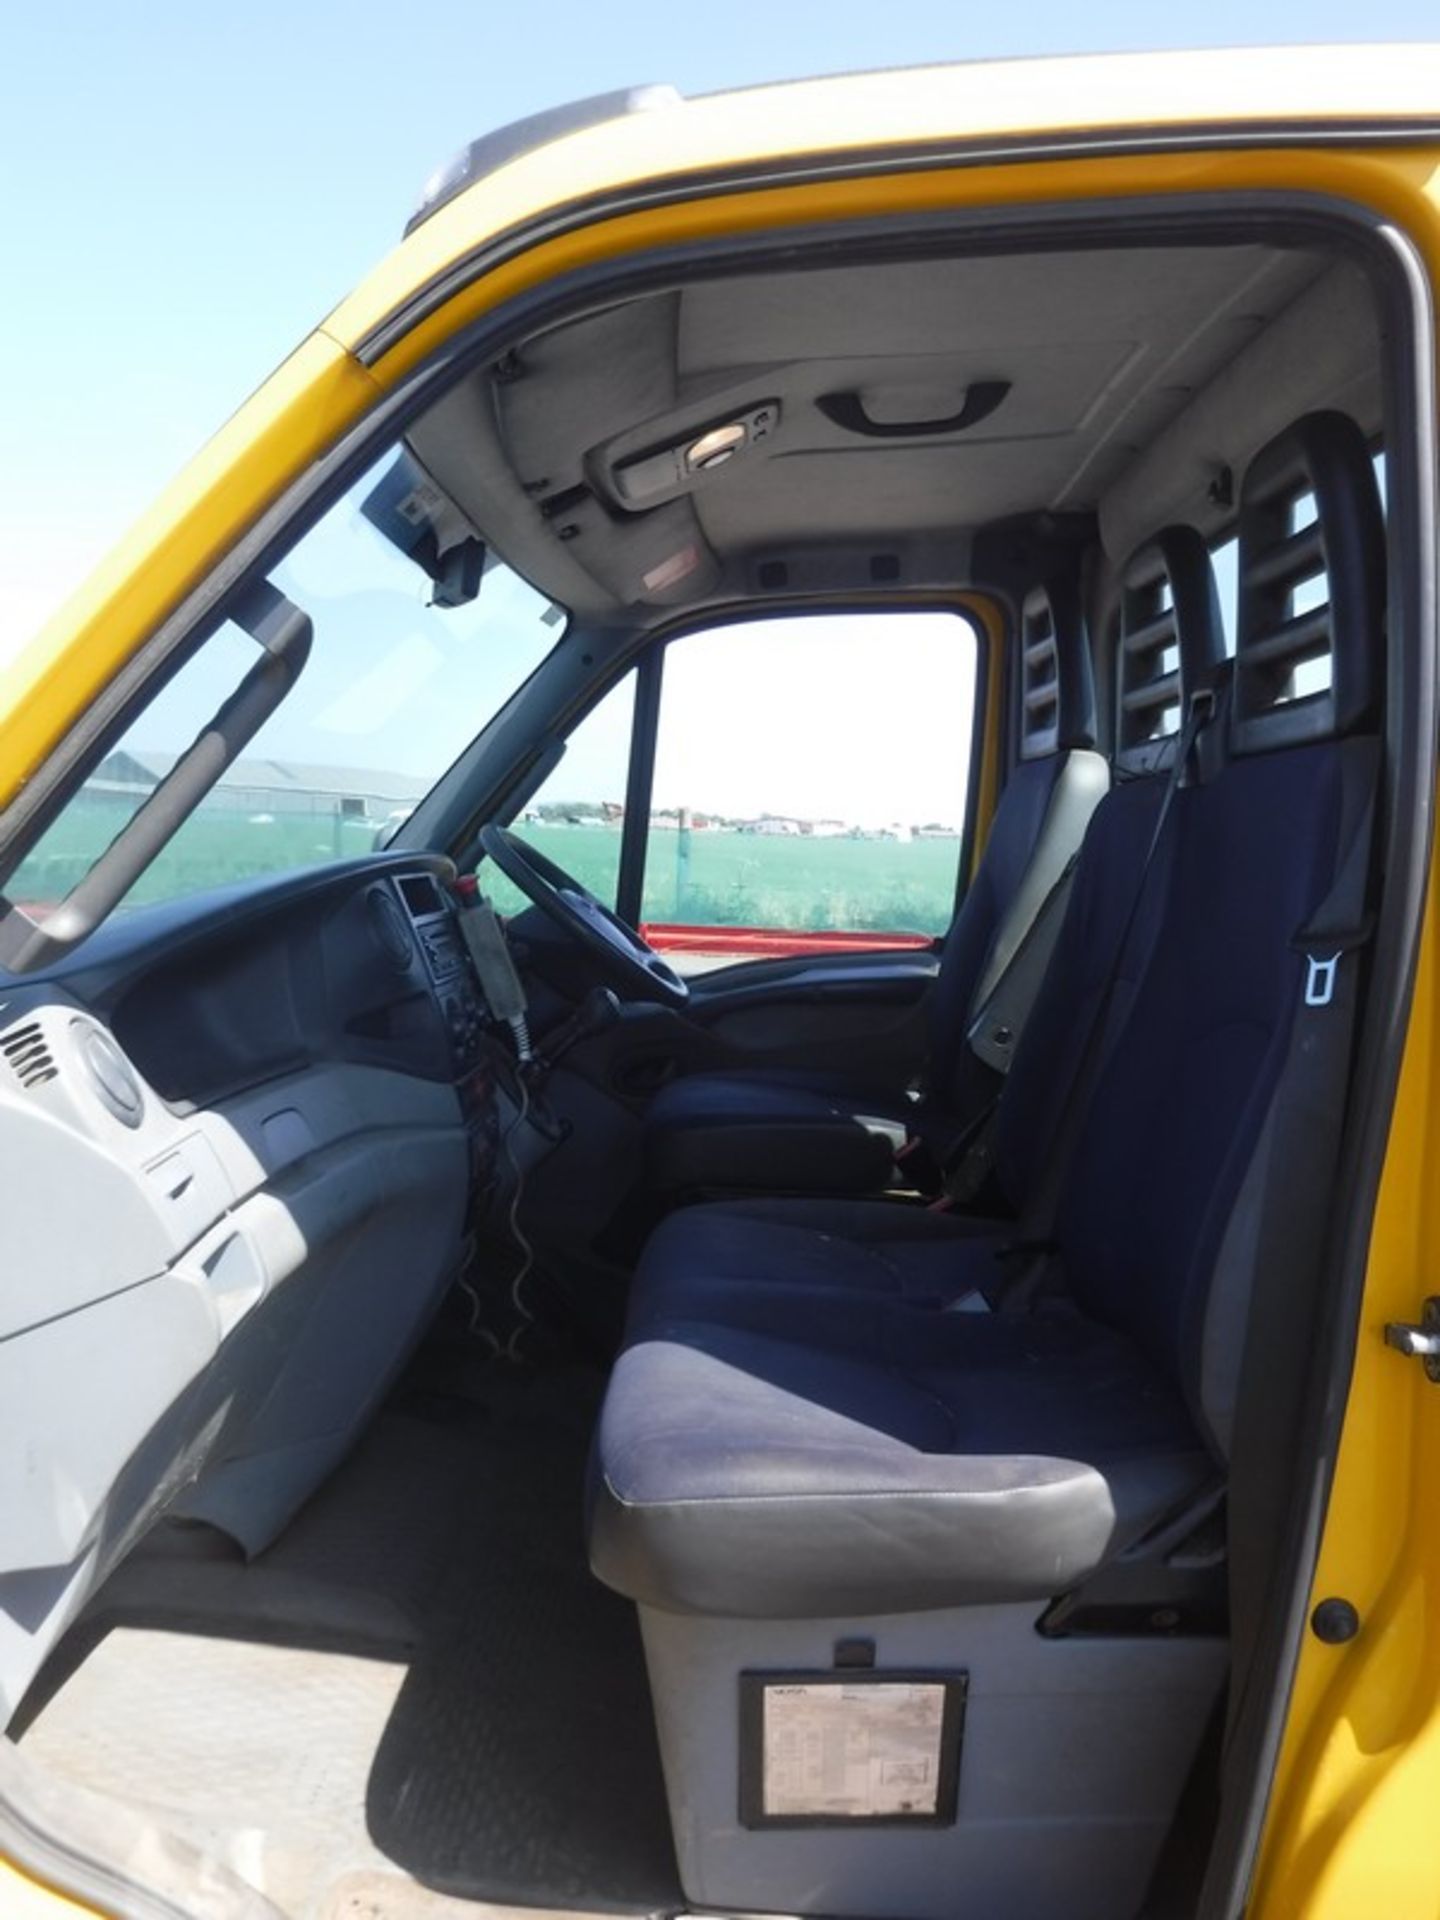 IVECO DAILY 65C18 - 2998cc - Image 30 of 30